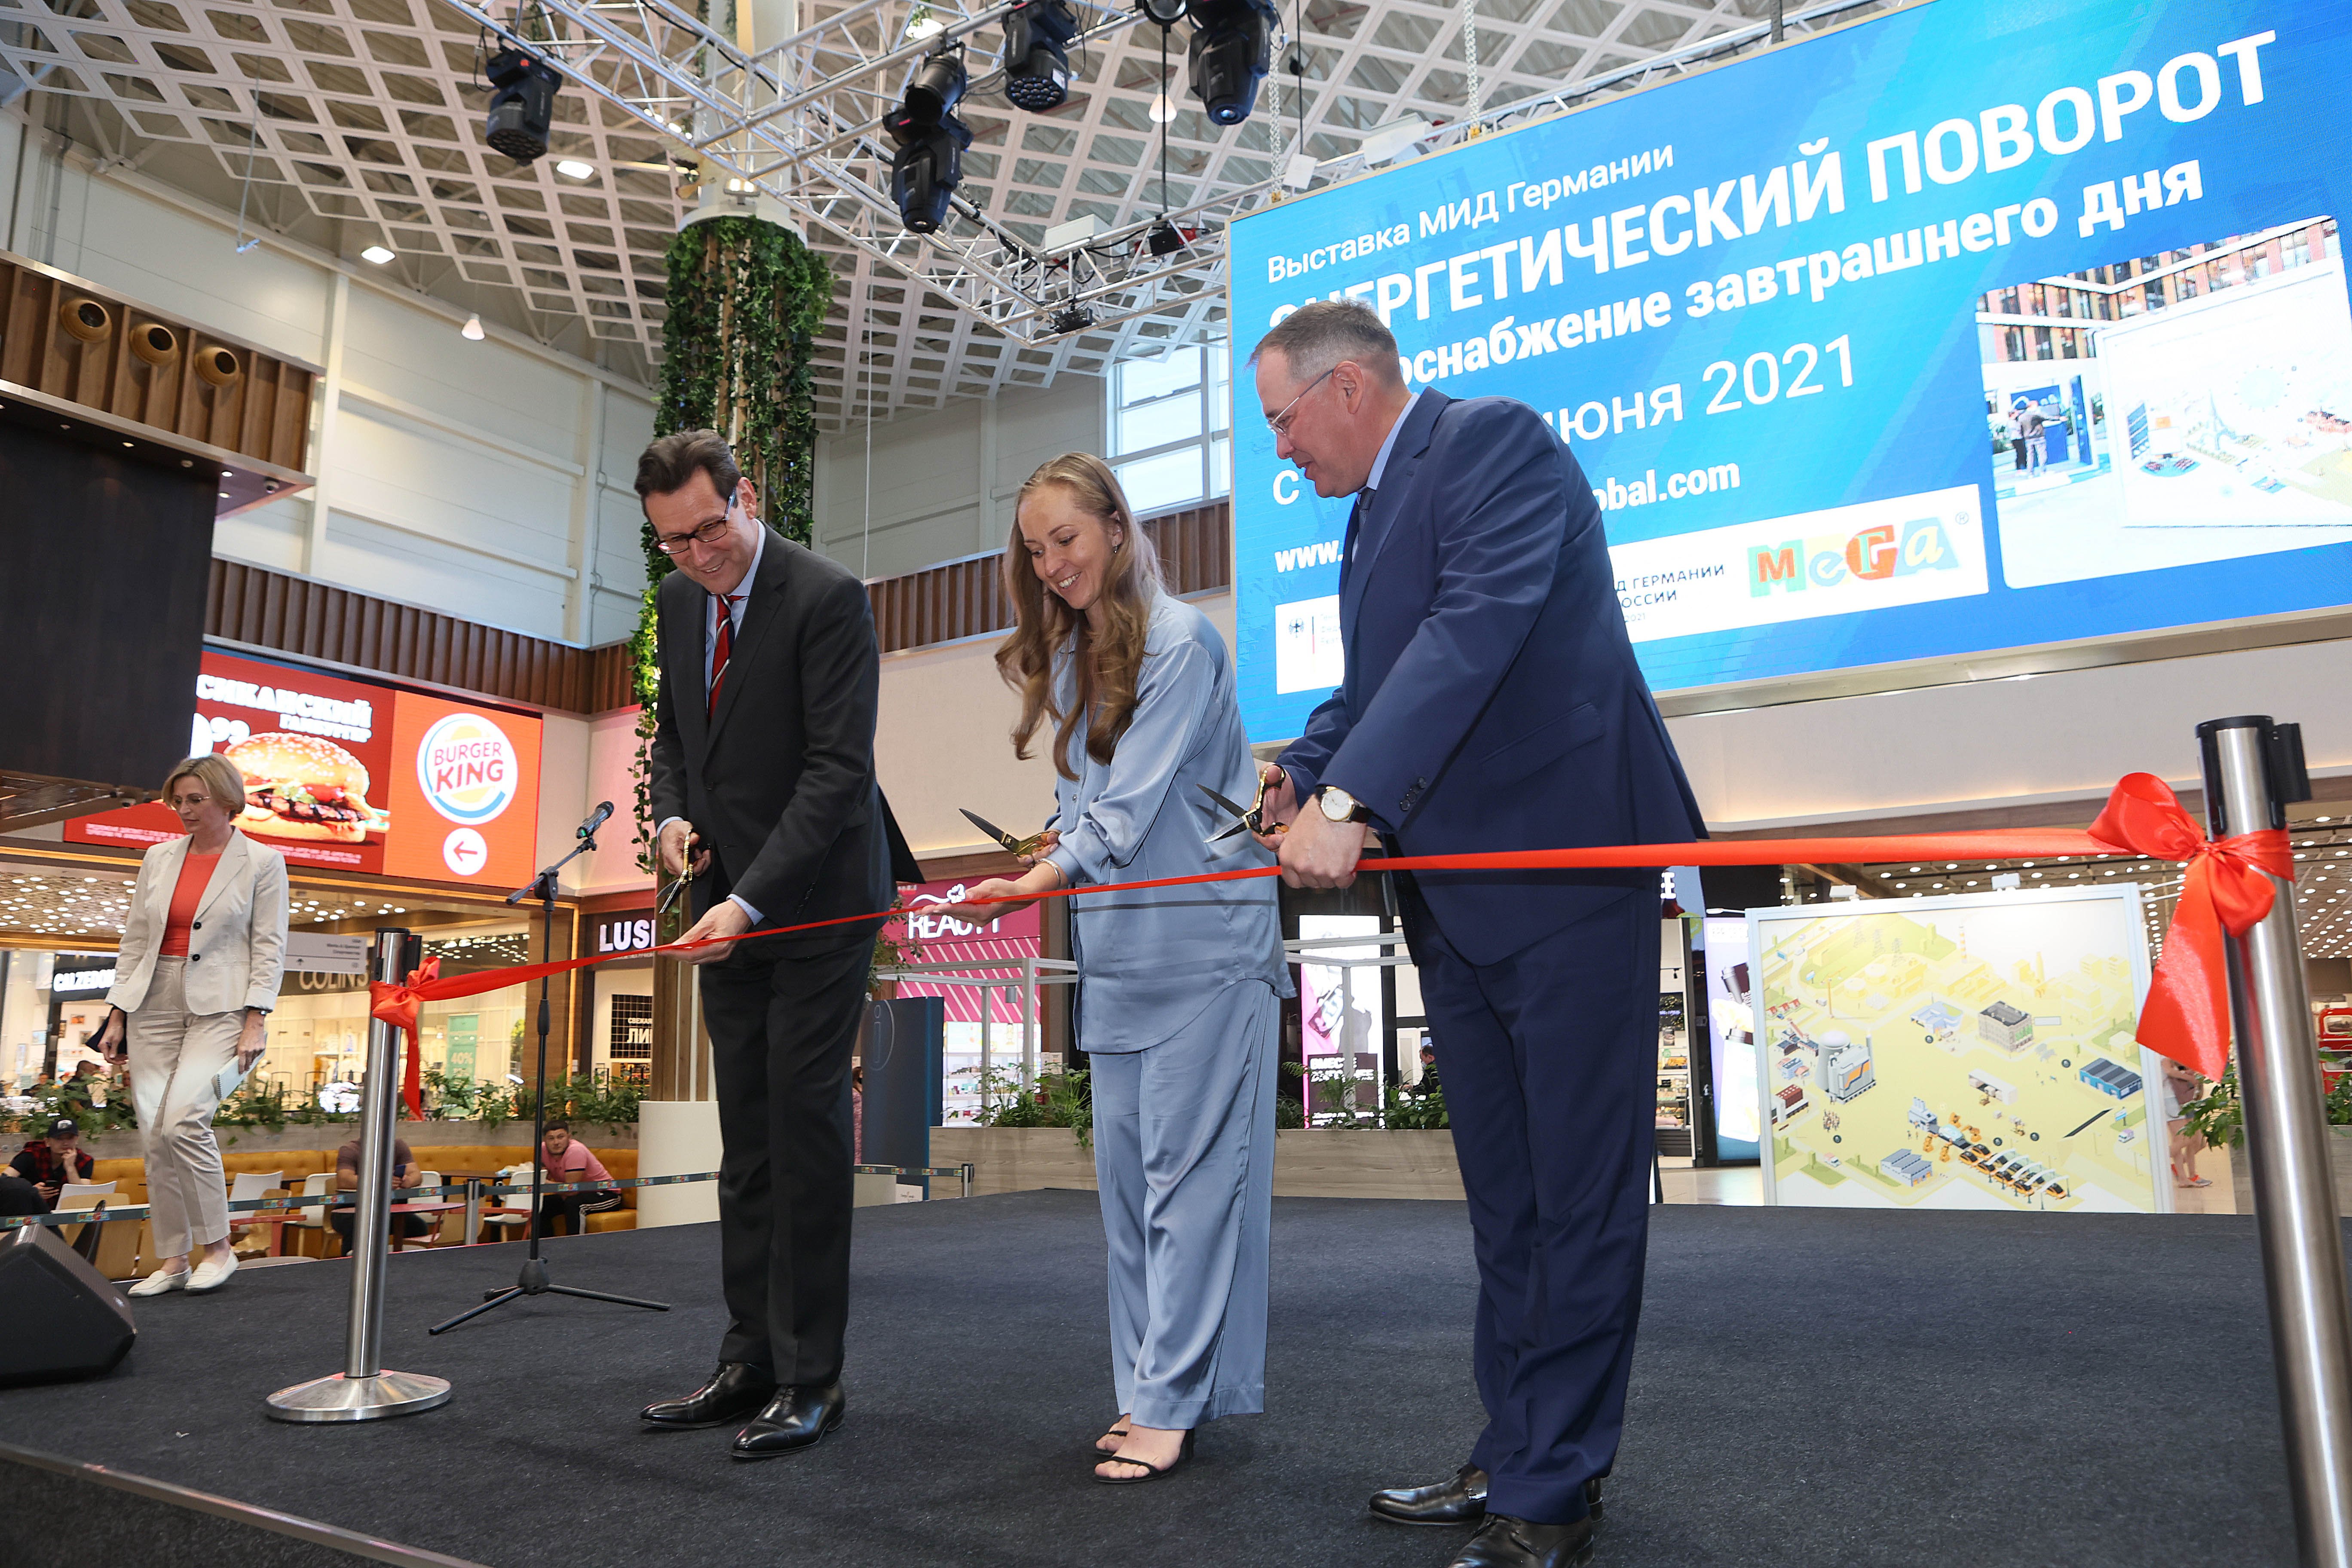 Two men and a woman are cutting a red band to open the travelling exhibition in Yekaterinburg, Russia, while standing on a stage. June 2021.